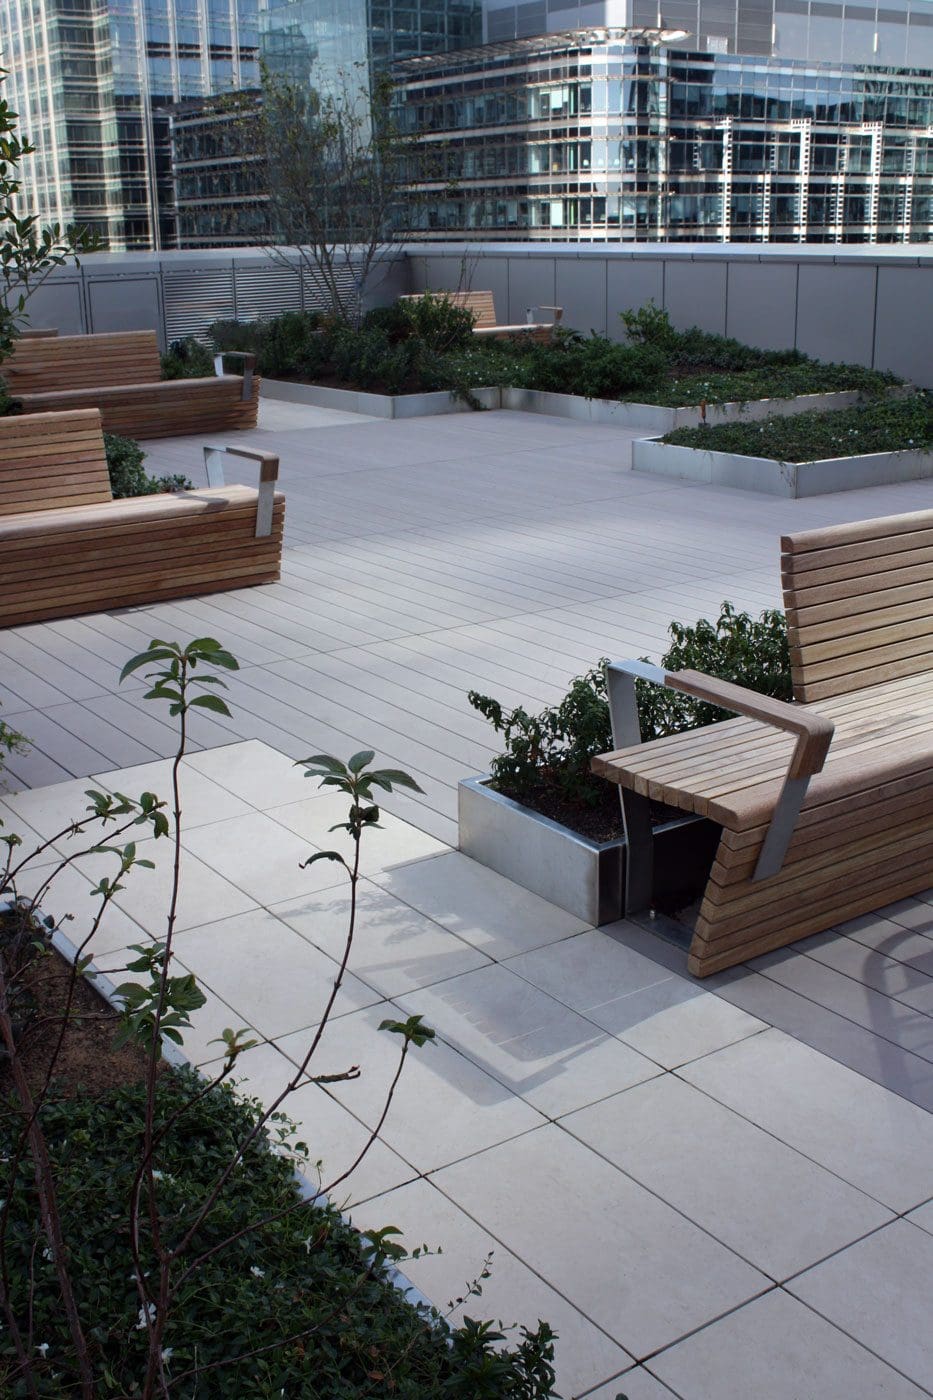 Planters and seating are used to create zones.